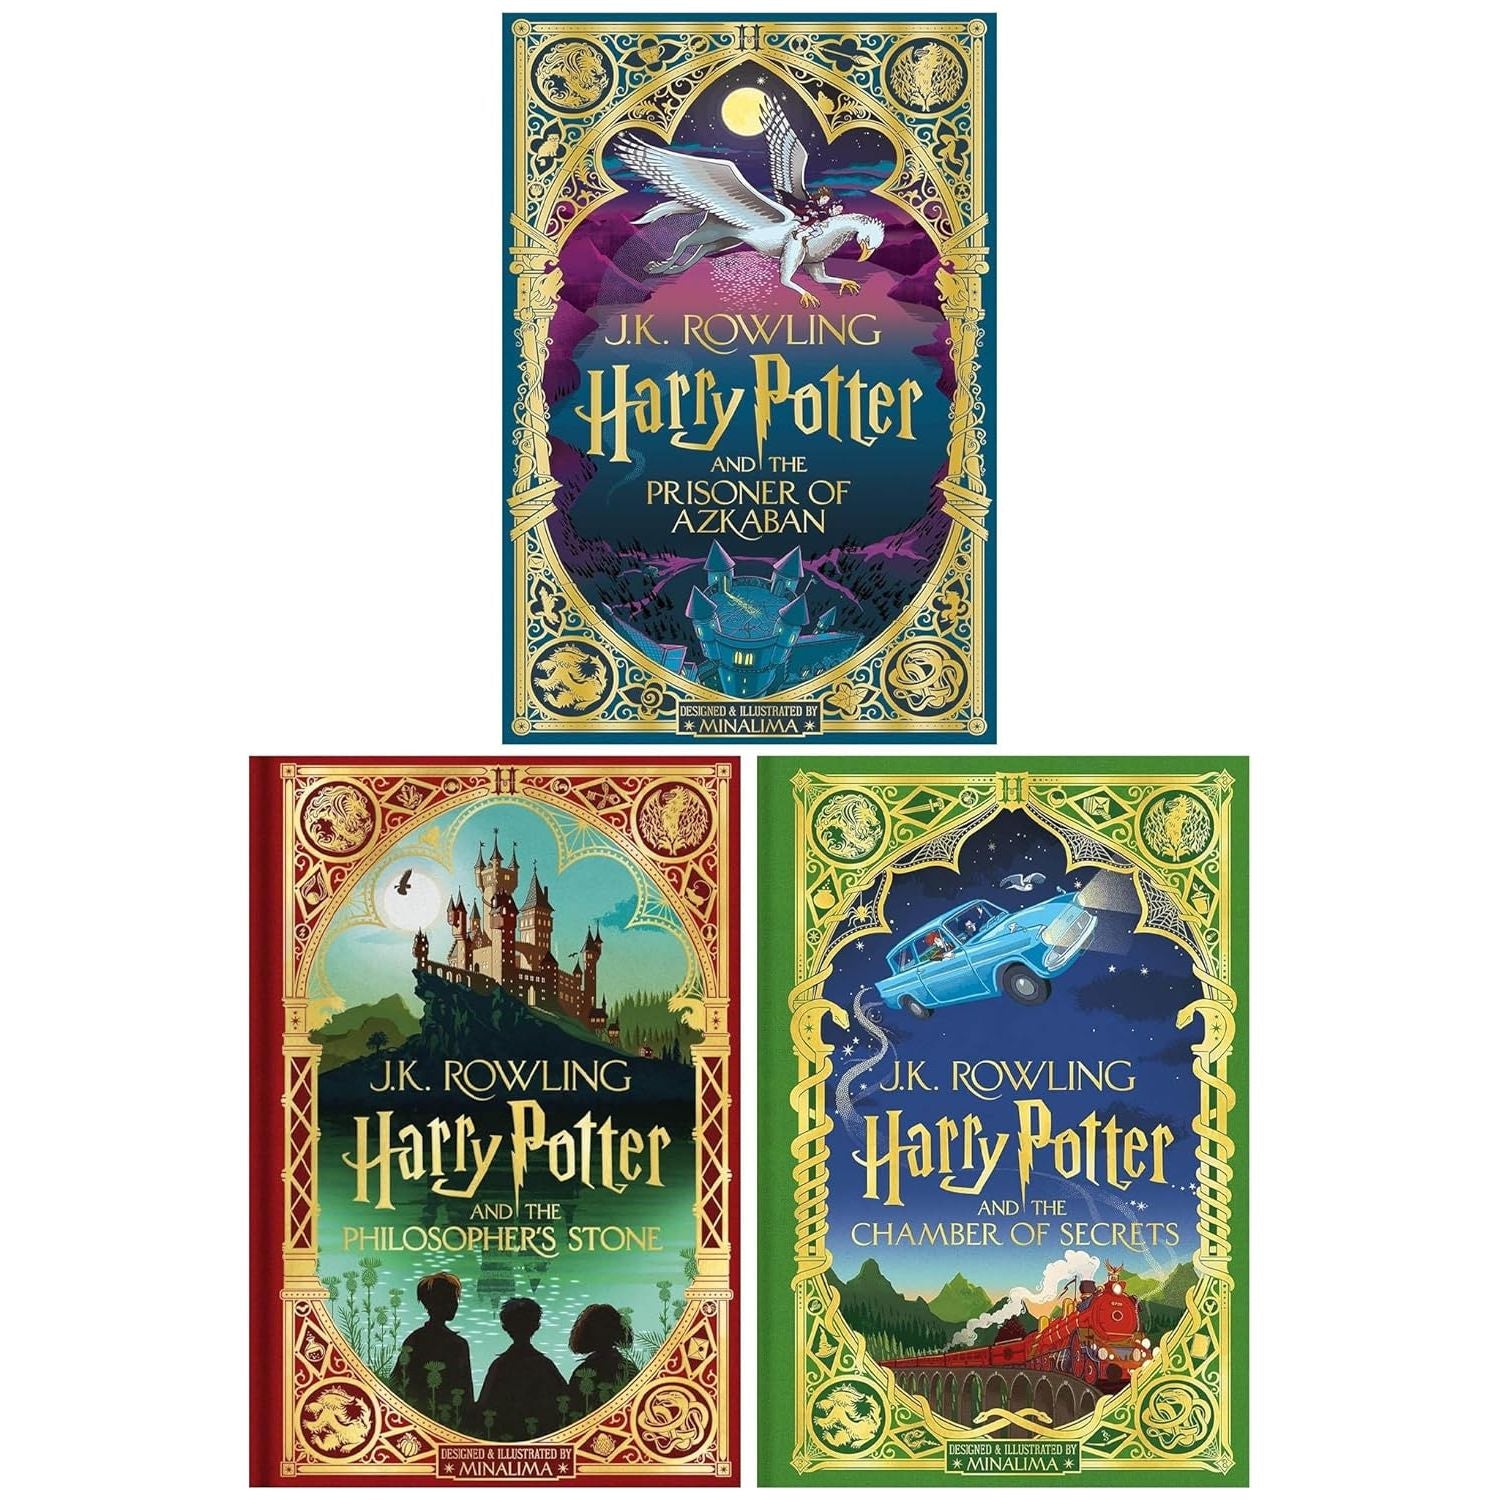 Harry Potter Mina Lima Edition Series Collection 2 Books Set by